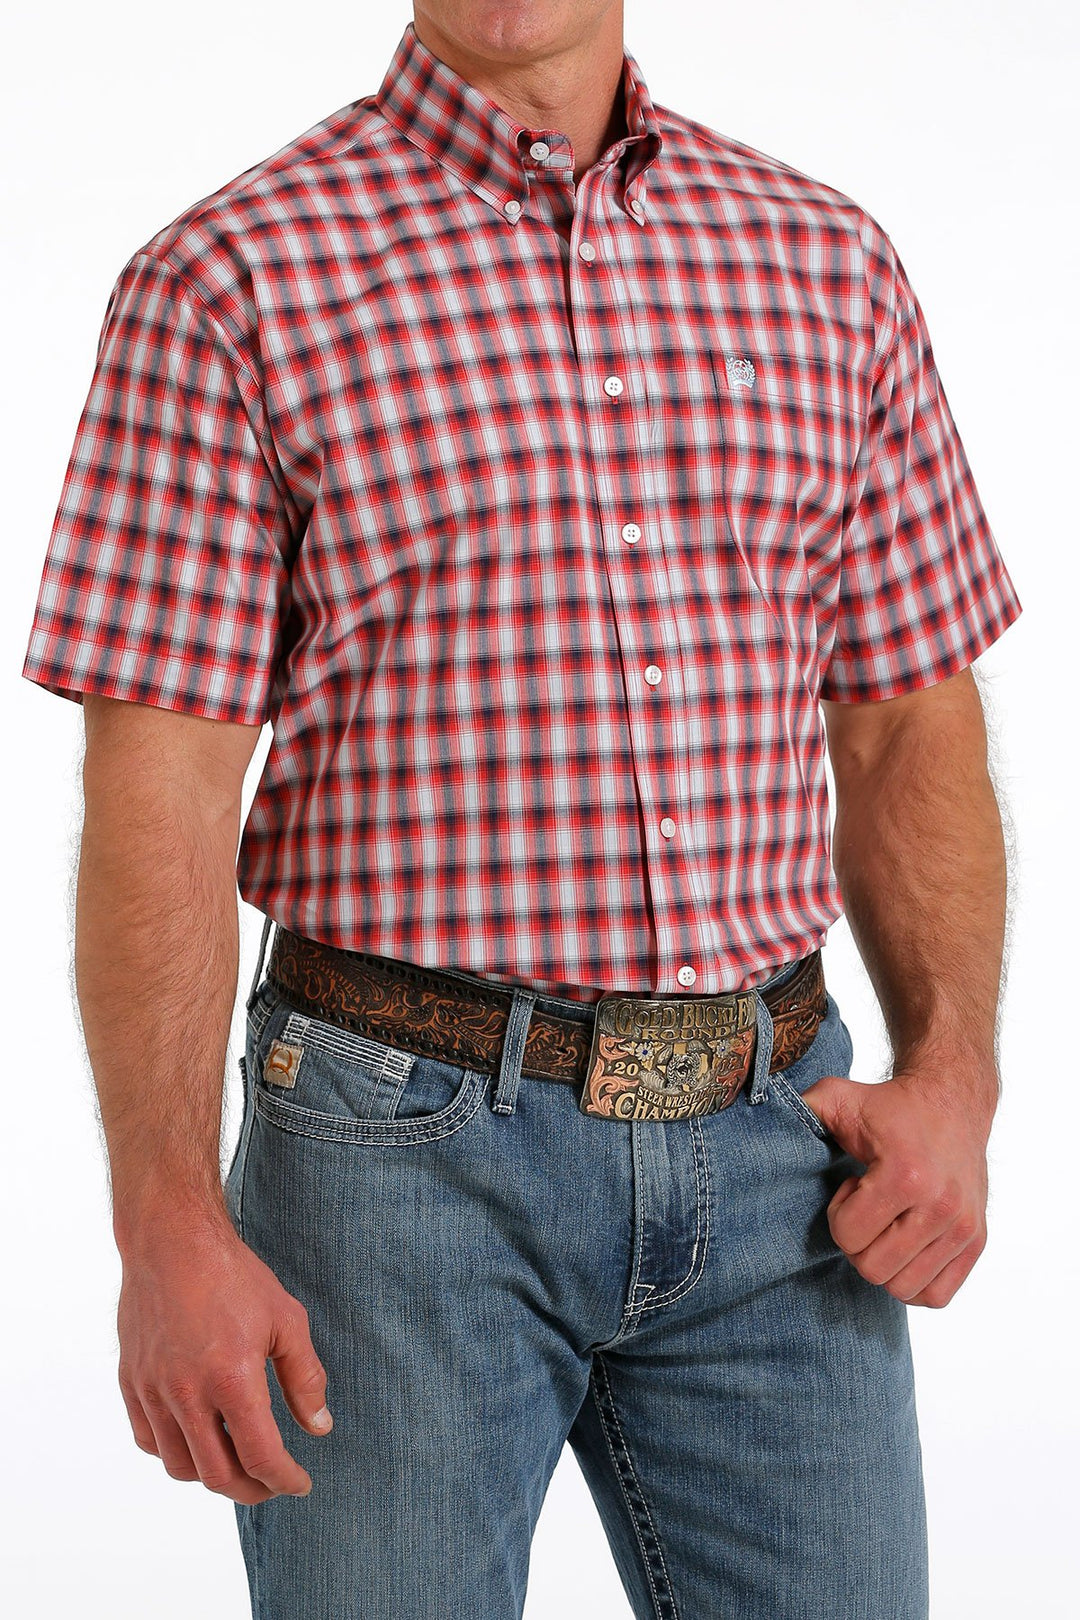 Cinch - Mens Red/Navy S/S Arena Shirt